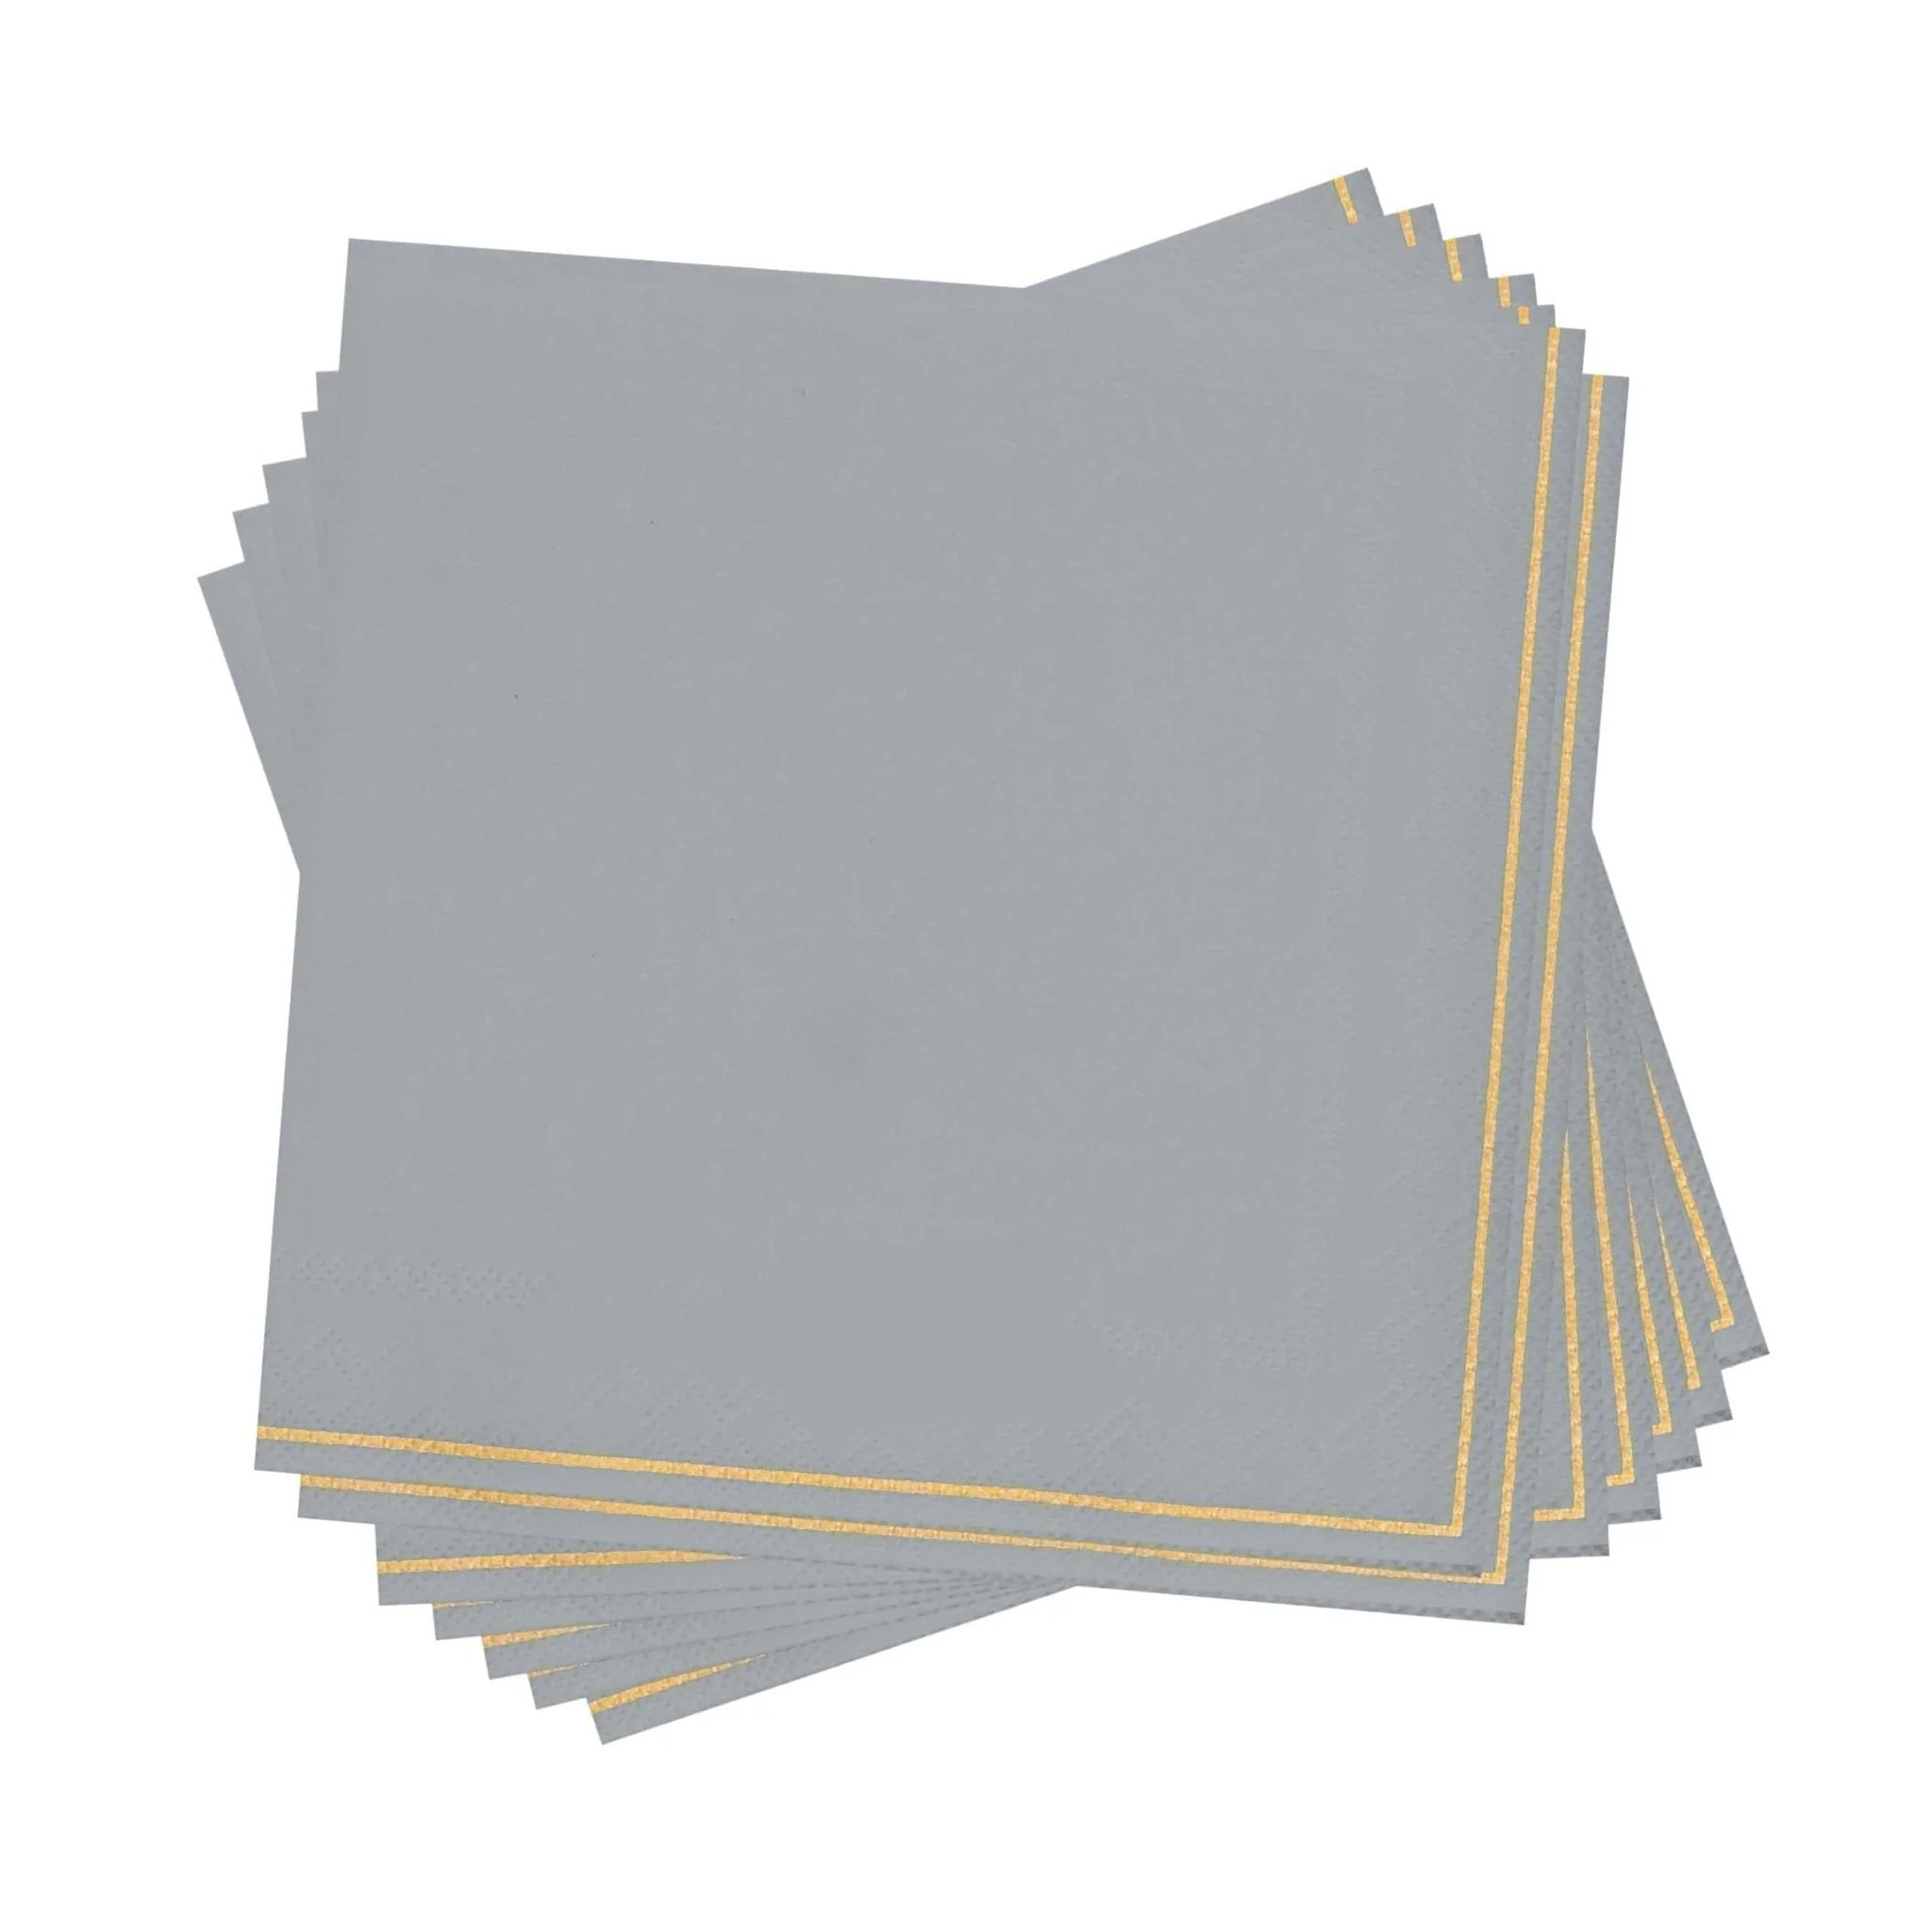 Luxe Party Gray with Gold Stripe Beverage Napkins - 20 pcs